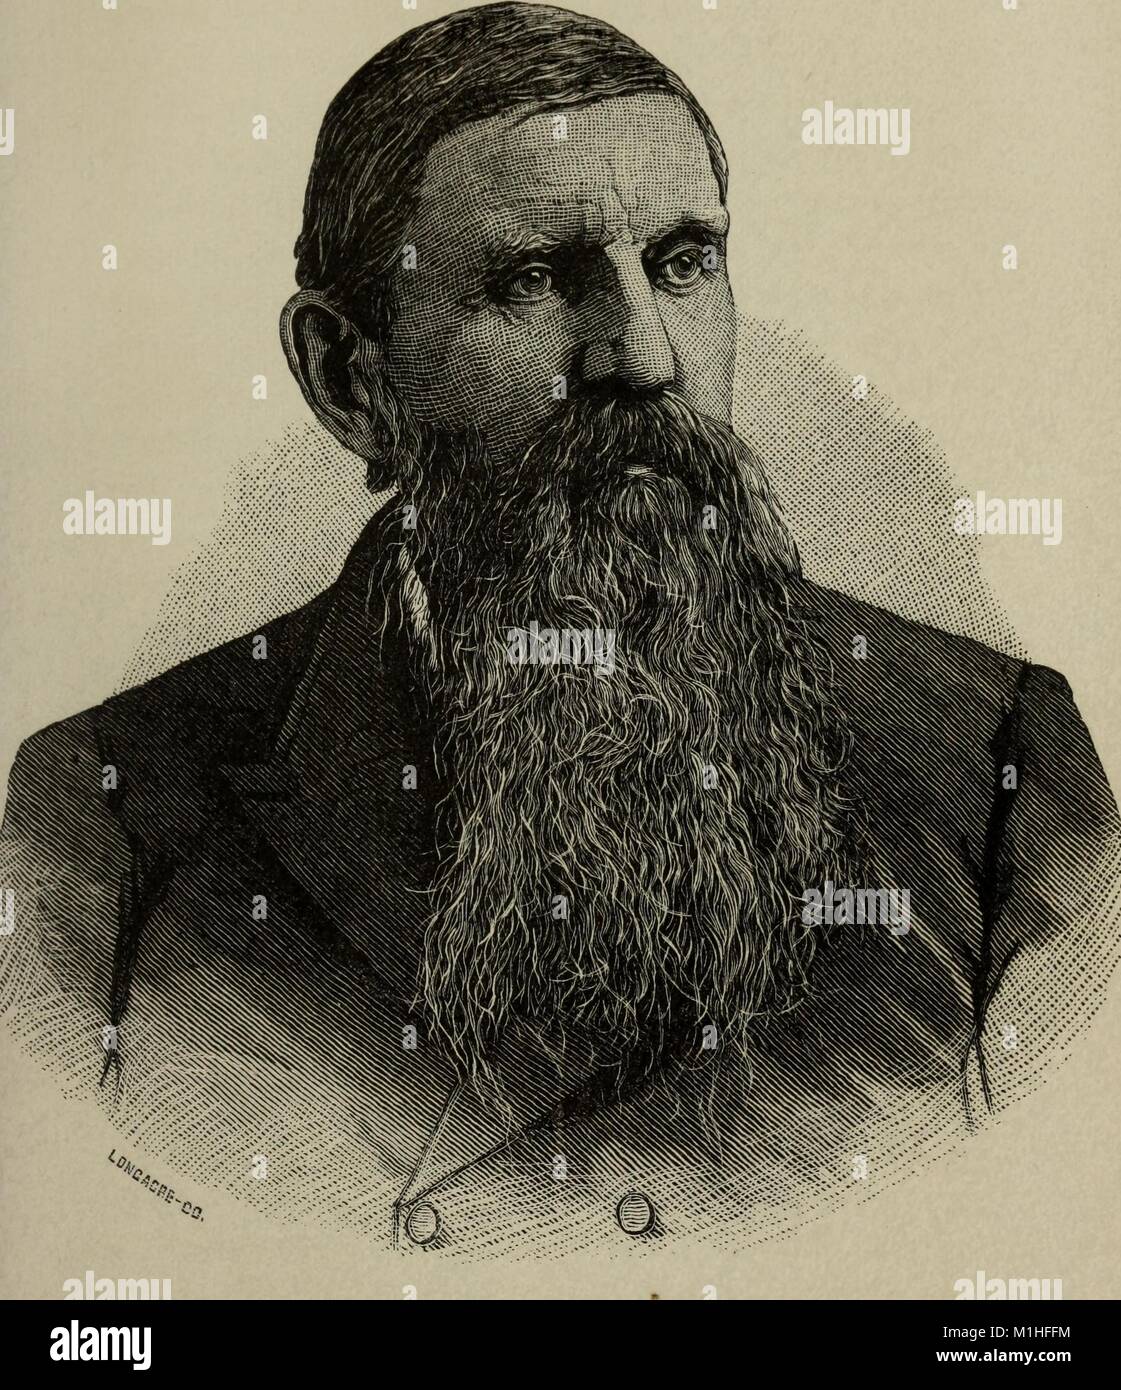 Black and white engraving, depicting a head-shot of abolitionist Dr Jacob L Paxon, wearing a double-breasted suit jacket, and a serious expression, with combed-over hair and a long mustache and beard, from the volume 'History of the Underground railroad in Chester and the neighboring counties of Pennsylvania, ' authored by RC (Robert Clemens) Smedley, 1883. Courtesy Internet Archive. () Stock Photo